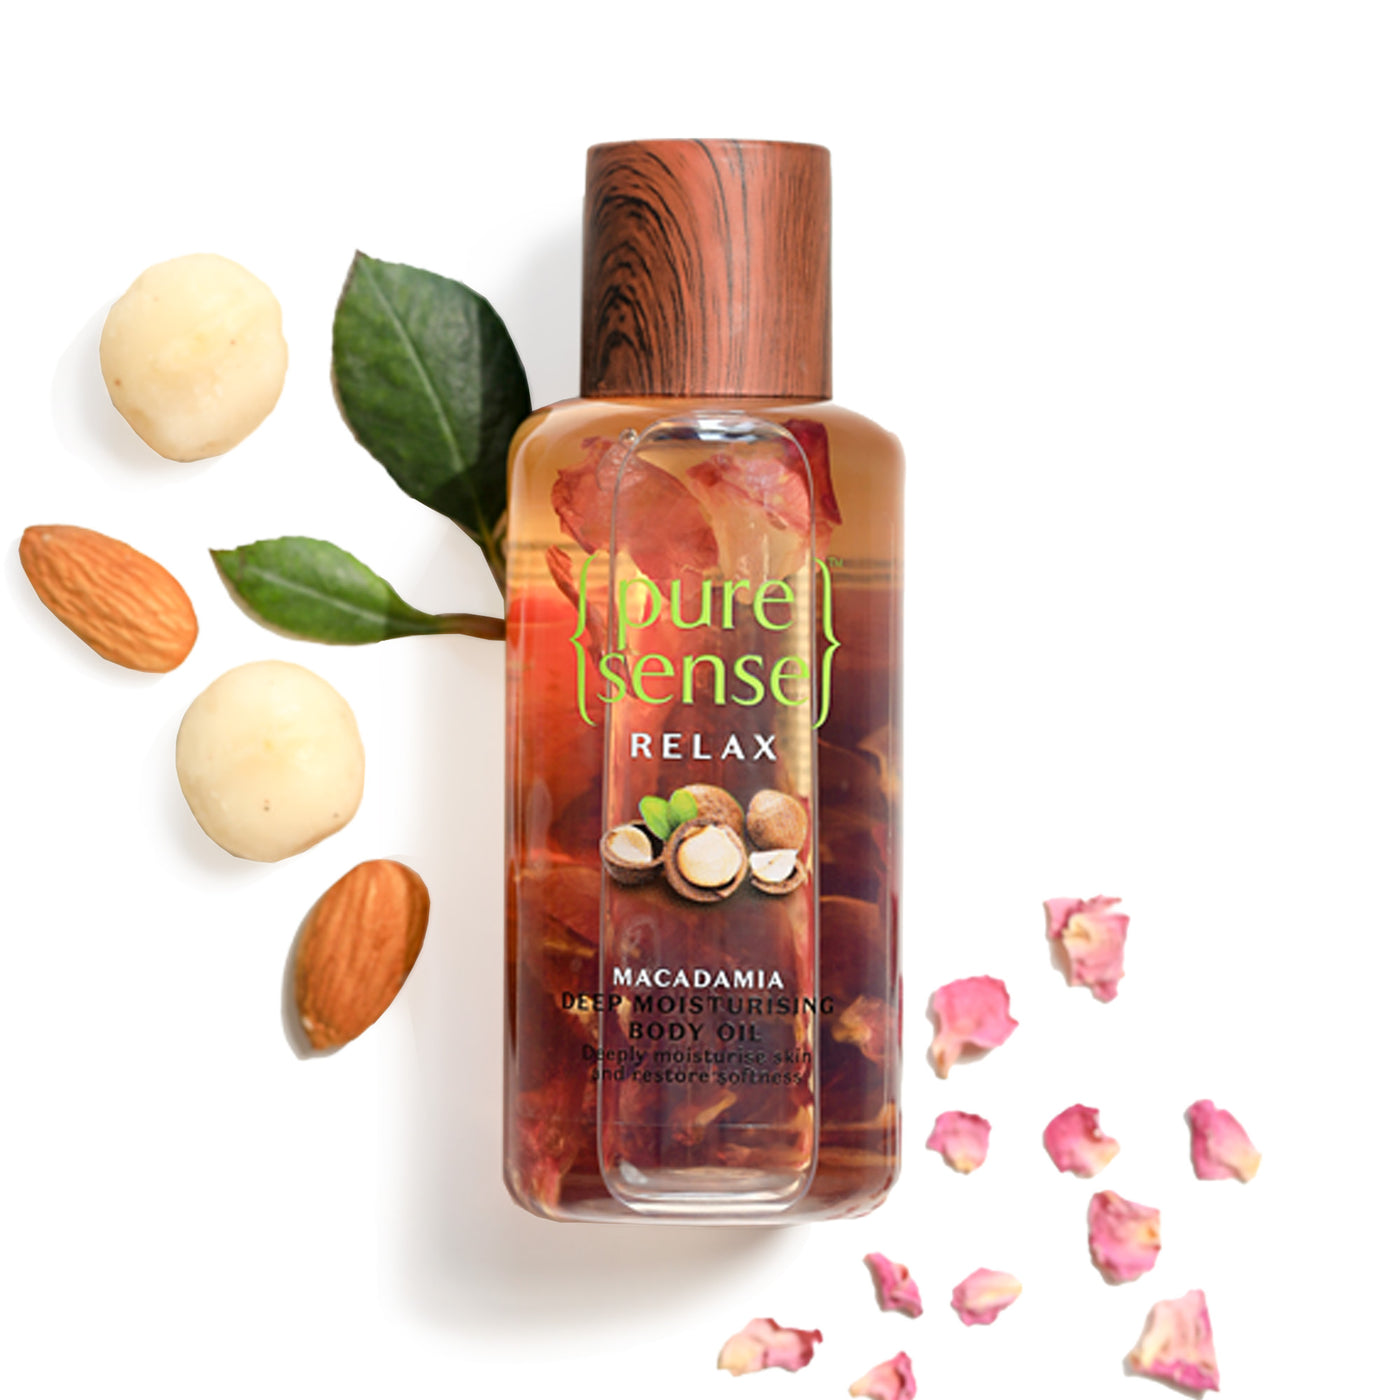 Relaxing Macadamia Deep Moisturising Body Oil | From the makers of Parachute Advansed | 100 ml - PureSense